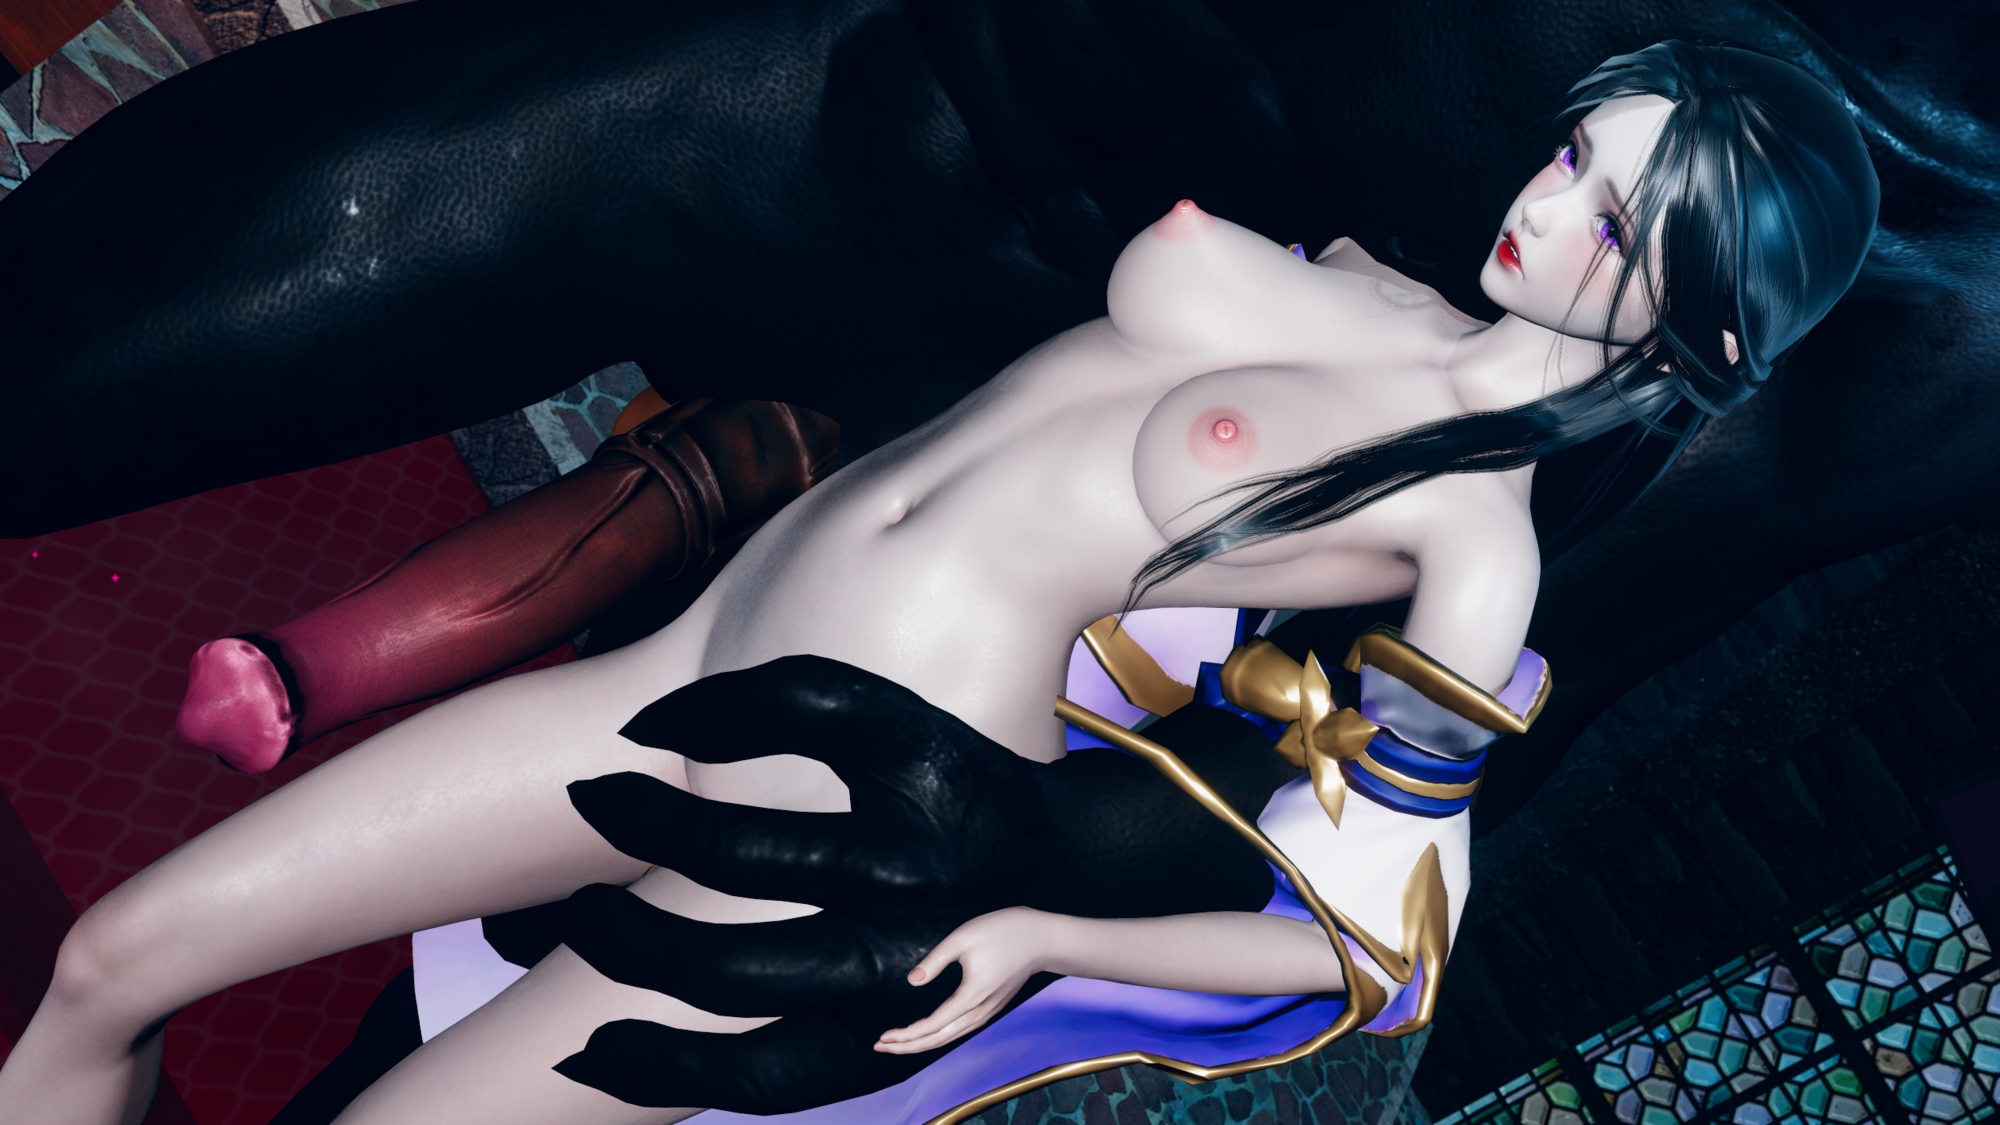 Honey Select 2 (勇敢牛牛寝取紫霞) Honey Select 2 Petite Teen Hentai 3d Porn Pussy Pink Nipples Natural Boobs Natural Tits Sex Nude Naked Monster Monster Cock Horsecock Lift Up